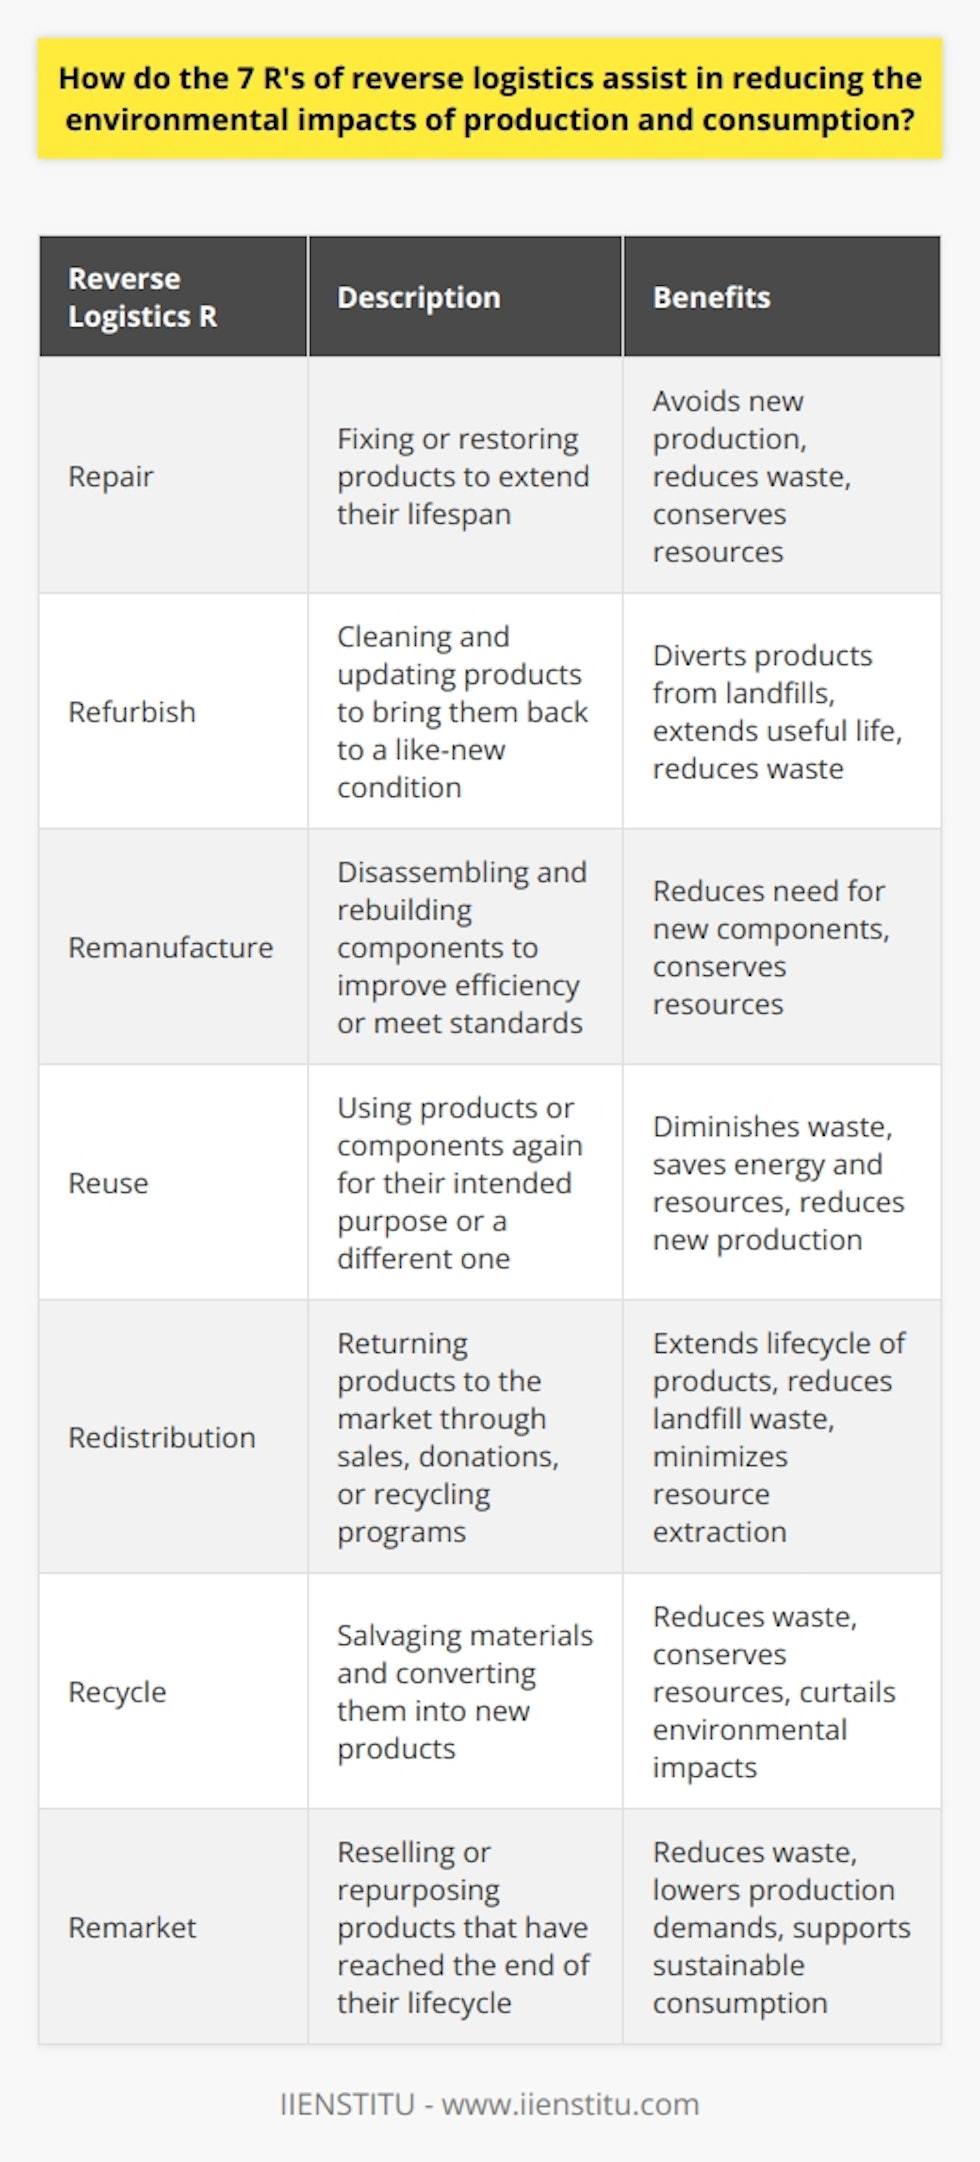 The 7 R's of reverse logistics, namely repair, refurbish, remanufacture, reuse, redistribution, recycle, and remarket, offer a comprehensive framework for reducing the environmental impacts of production and consumption. Each R focuses on a specific action that helps businesses achieve a closed-loop approach, minimizing waste and promoting sustainability.Repairing products is the first step in extending their lifespan. By fixing or restoring products, companies avoid the need for new production and reduce waste. This practice not only conserves resources but also helps decrease the environmental impacts associated with manufacturing.Refurbishing products involves cleaning and updating them to bring them back to a like-new condition. This process diverts products that would otherwise end up in landfills, extending their useful life and reducing waste.Remanufacturing is the practice of disassembling and rebuilding components to improve efficiency or meet industry standards. This approach conserves resources by reducing the need for newly created components, thereby minimizing environmental impacts.Another effective strategy is the reuse of products. Reusing products or their components for their intended purpose or a different one helps diminish waste, alleviates the demand for new production, and saves energy and resources.Redistribution involves returning products to the market through sales channels, donations, or recycling programs. This practice extends the lifecycle of products, reduces landfill waste, and minimizes resource extraction.Recycling plays a crucial role in recovering valuable resources. By salvaging materials and converting them into new products, recycling reduces waste, conserves resources, and curtails the environmental impacts of production.Lastly, remarketing focuses on reselling or repurposing products that have reached the end of their lifecycle. By finding new uses or buyers for these products, companies reduce waste, lower production demands, and support sustainable consumption.In conclusion, the 7 R's of reverse logistics serve as a comprehensive approach to reducing the environmental impacts of production and consumption. By embracing repair, refurbish, remanufacture, reuse, redistribution, recycle, and remarket, businesses can efficiently manage resources, minimize waste, and promote sustainable practices. This framework ultimately strengthens the circular economy and helps protect the environment for future generations.